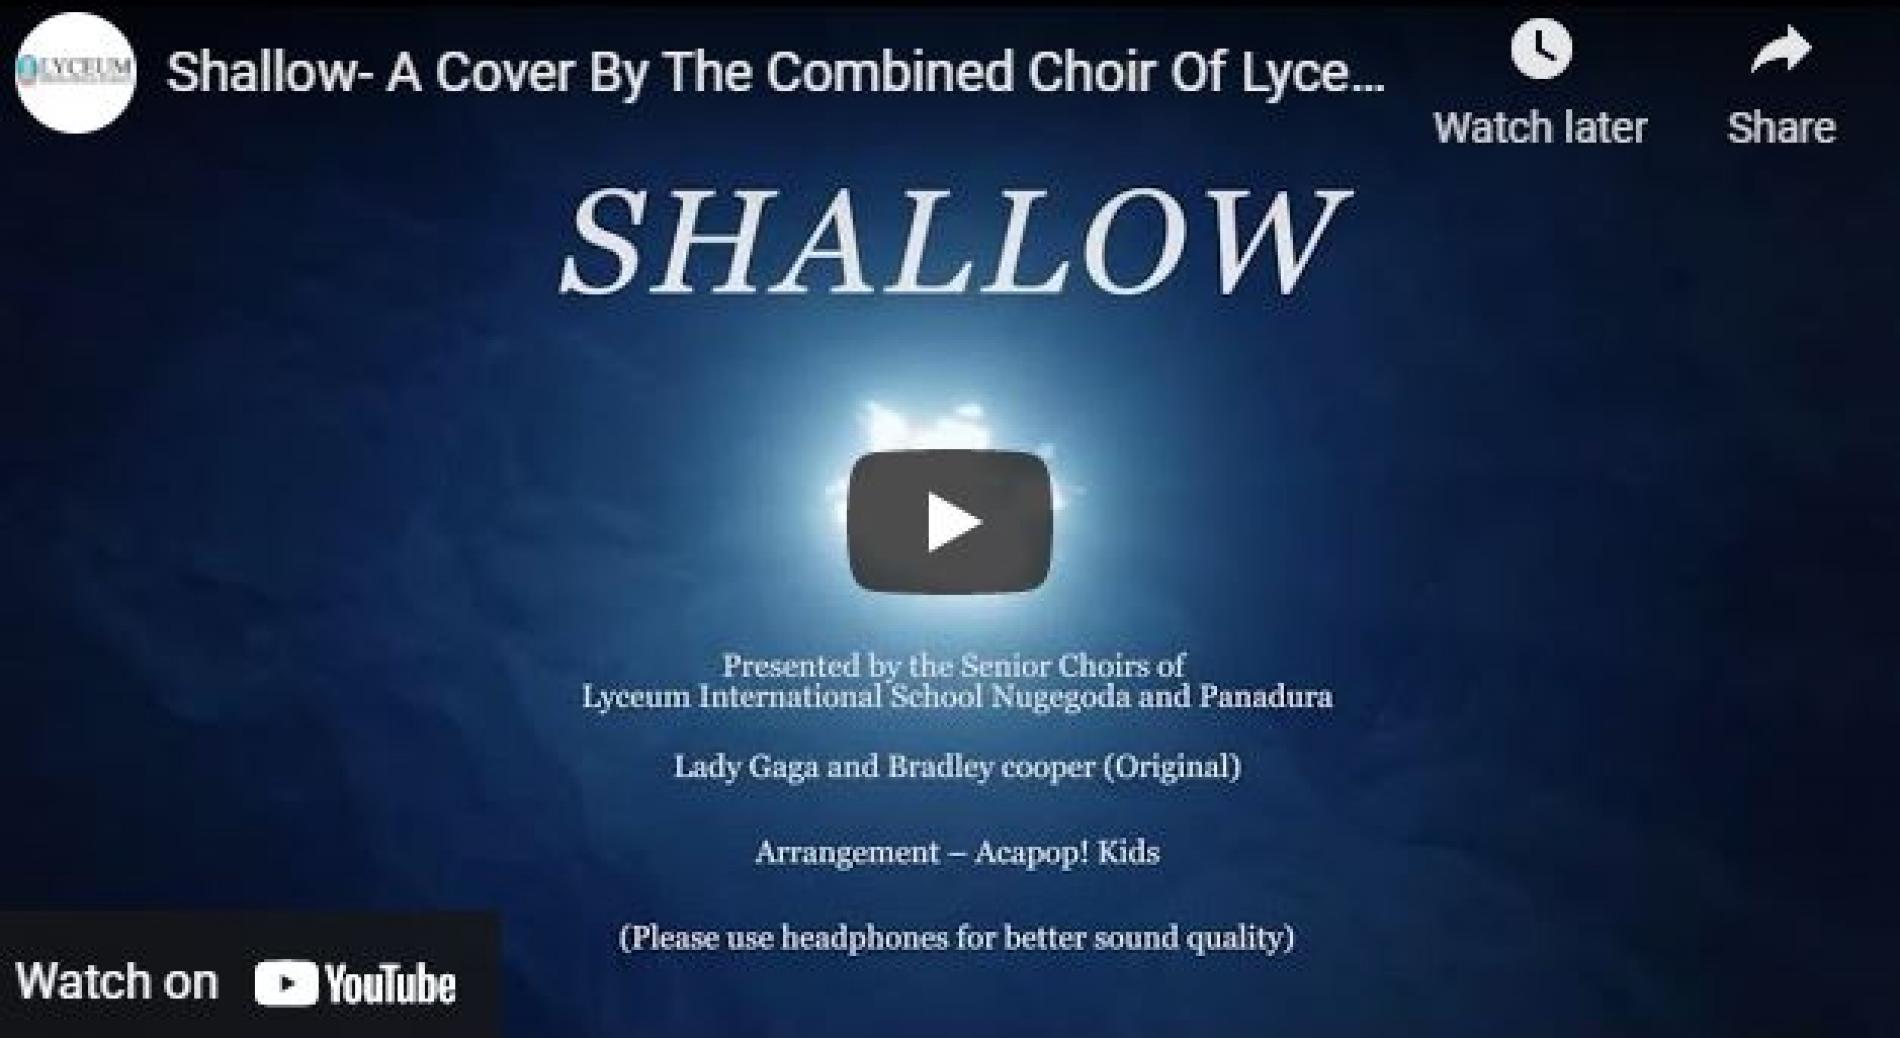 New Music : Shallow- A Cover By The Combined Choir Of Lyceum Nugegoda and Lyceum Panadura